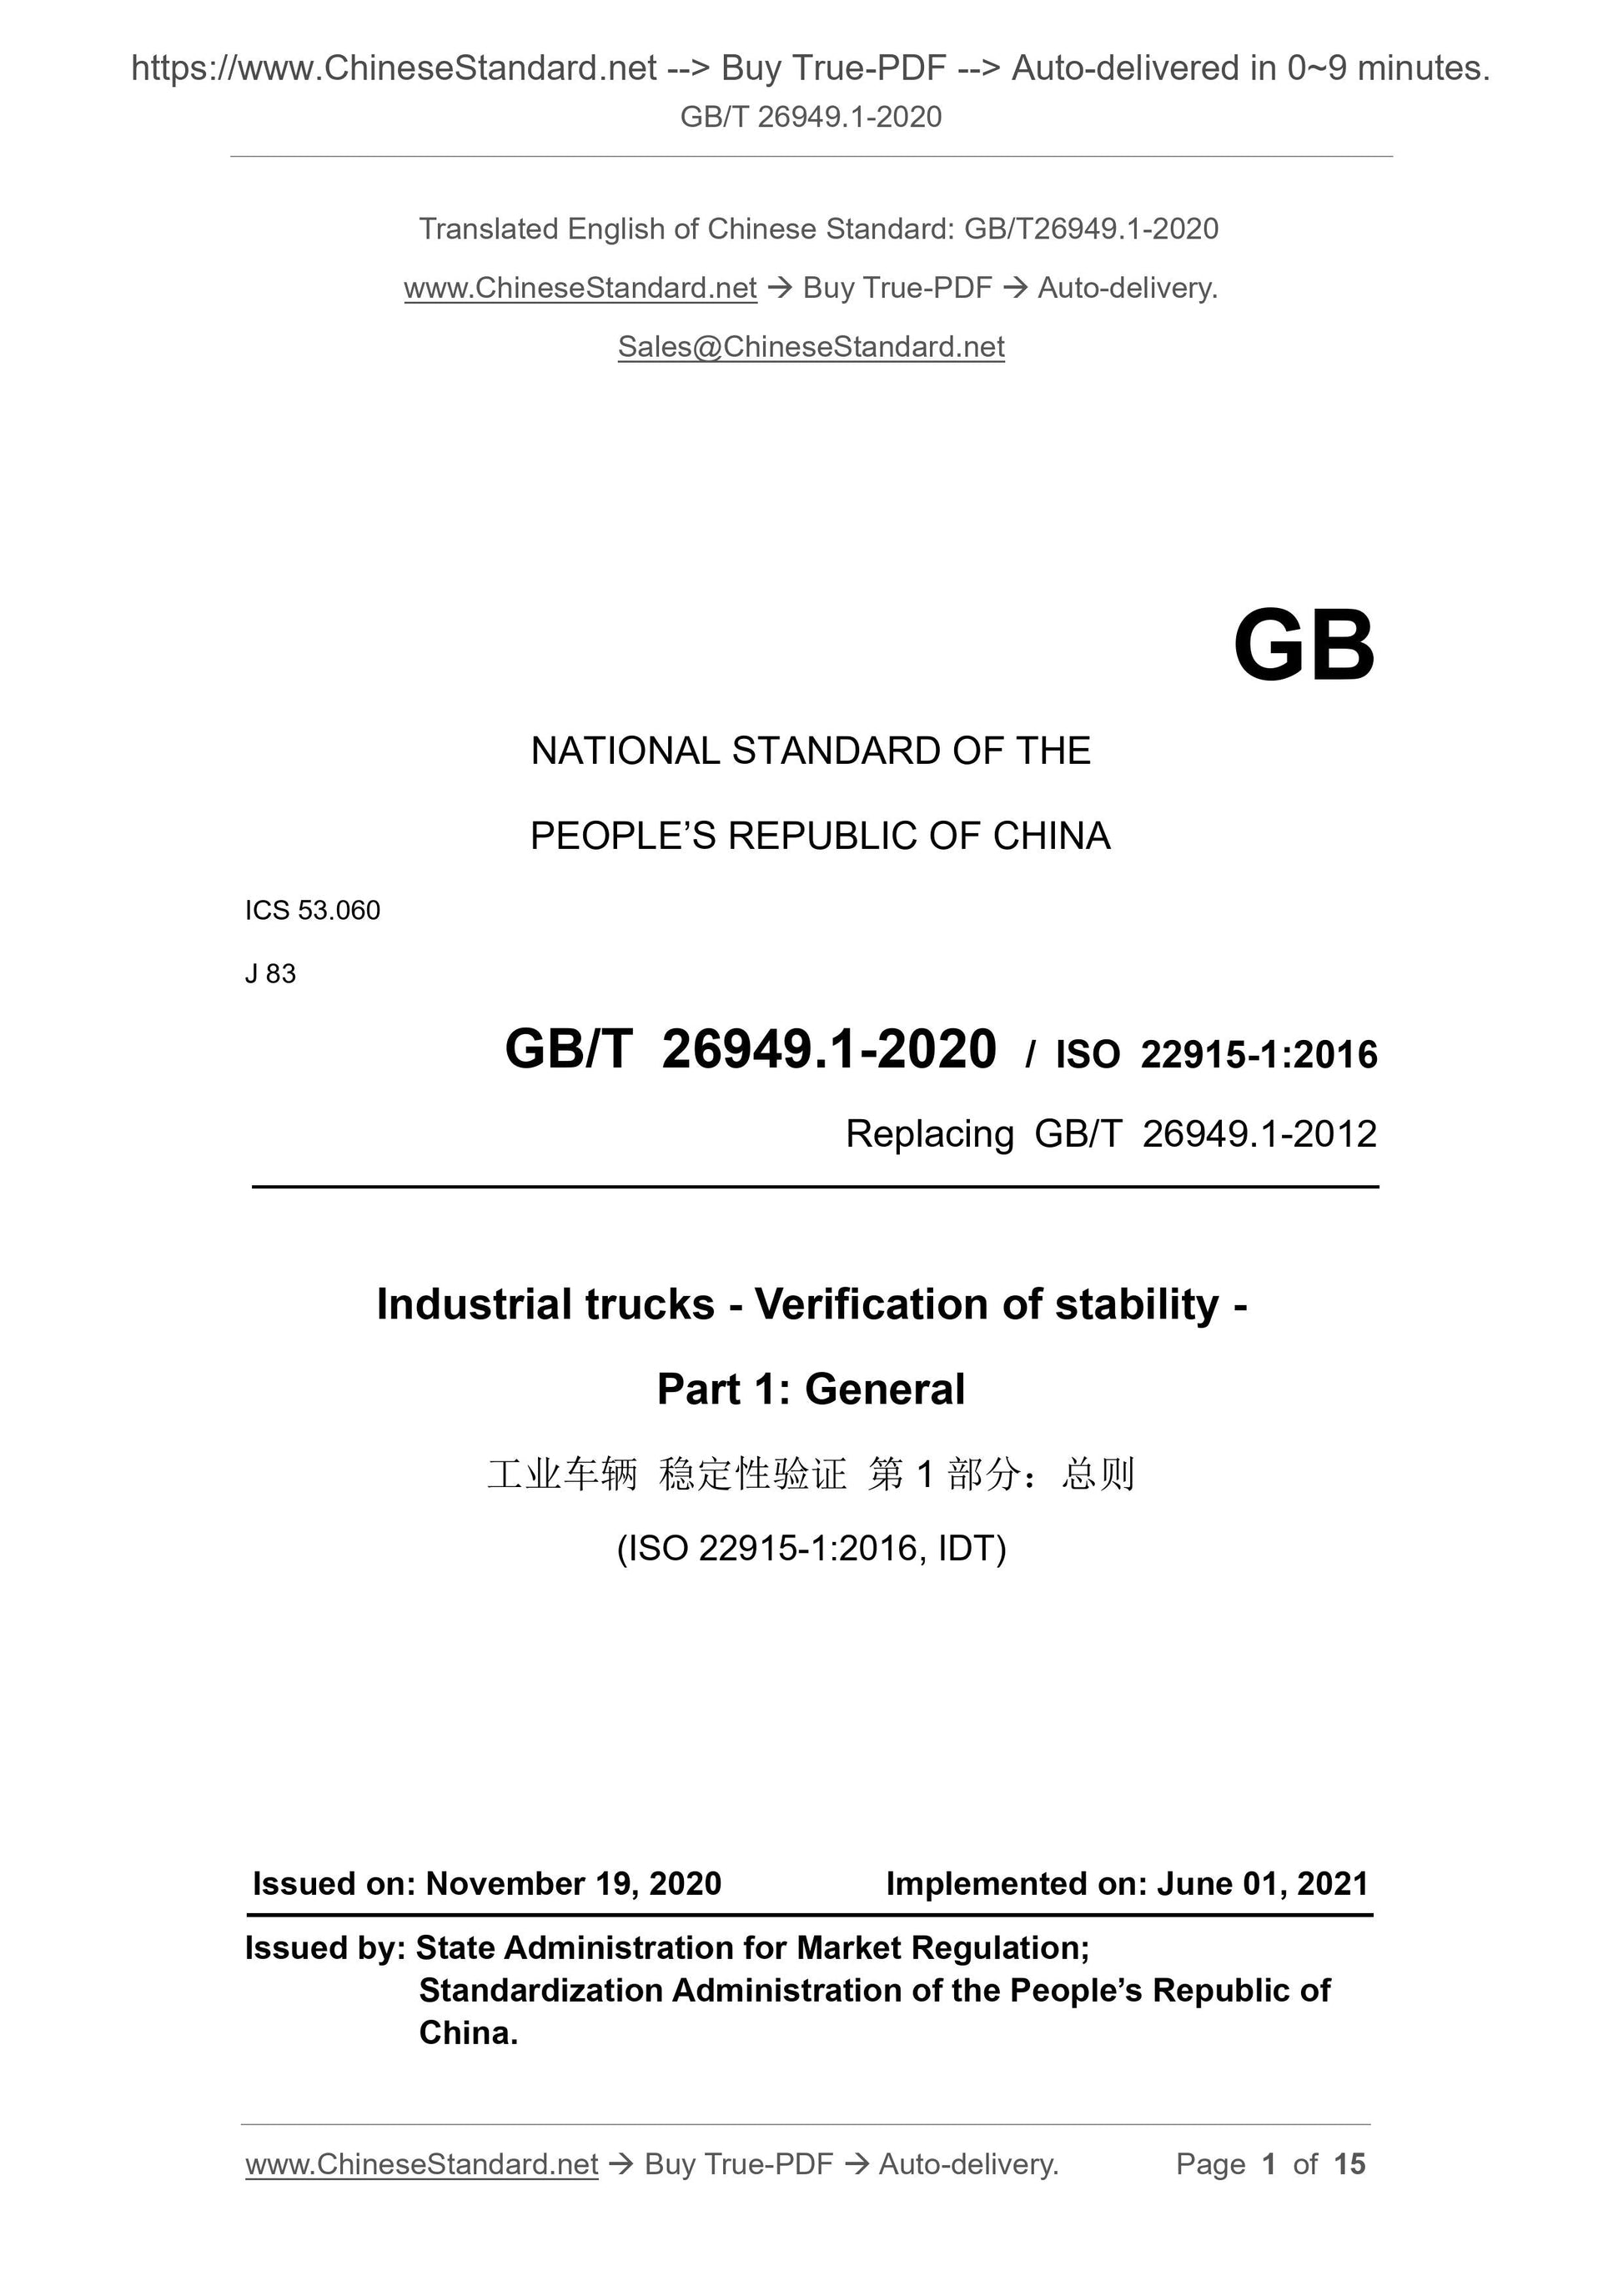 GB/T 26949.1-2020 Page 1